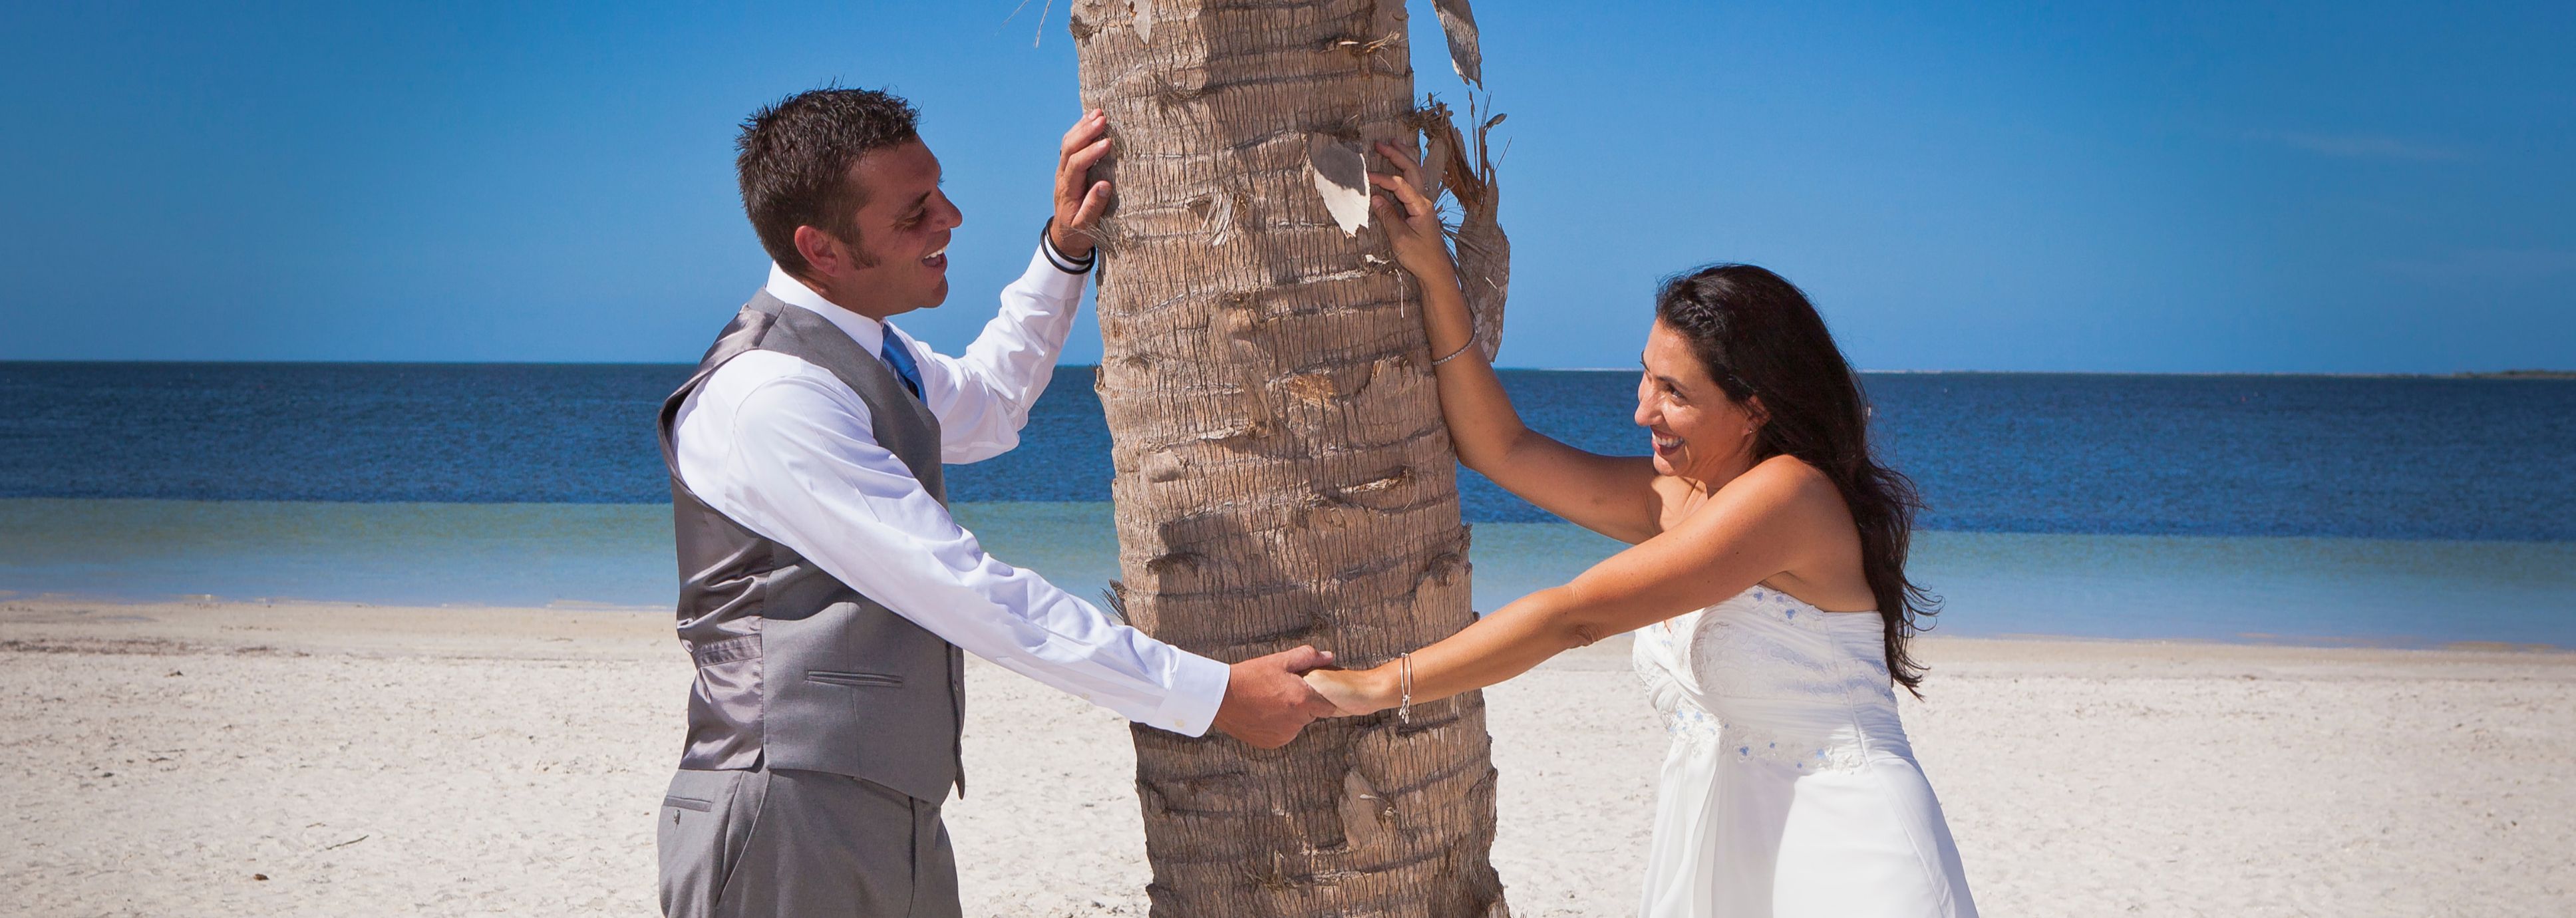 Affordable Tampa Bay Area Wedding Packages Rob Gale Photography